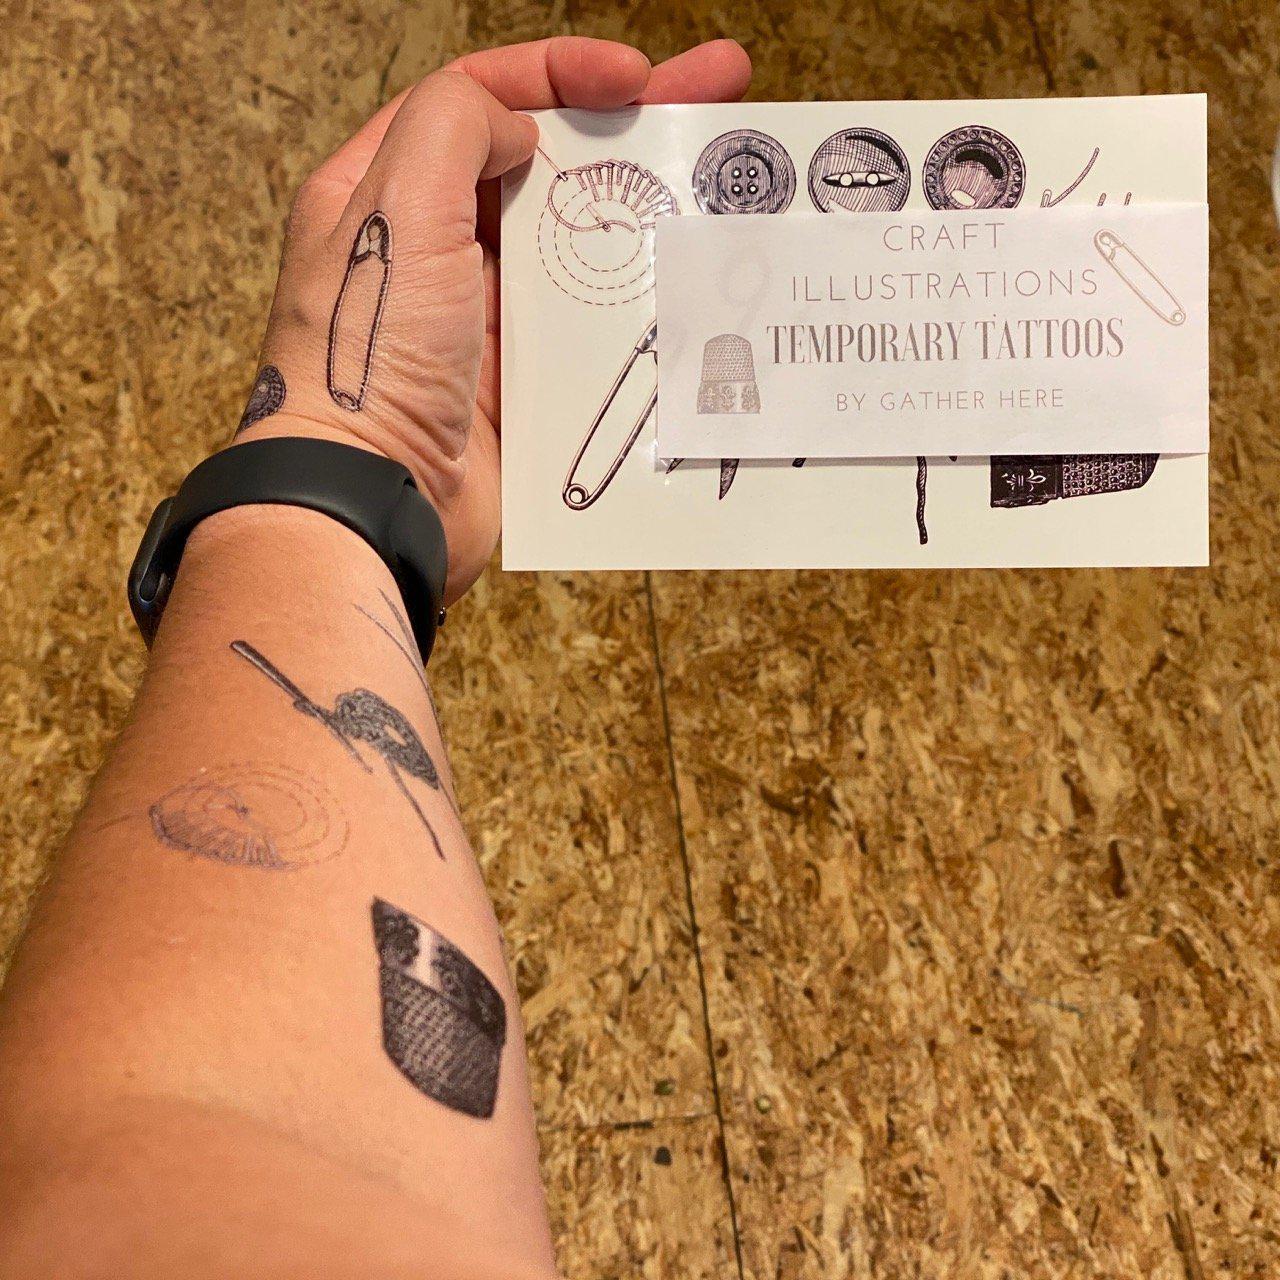 gather here-Temporary Tattoos by Gather Here, Series 1-accessory-gather here online